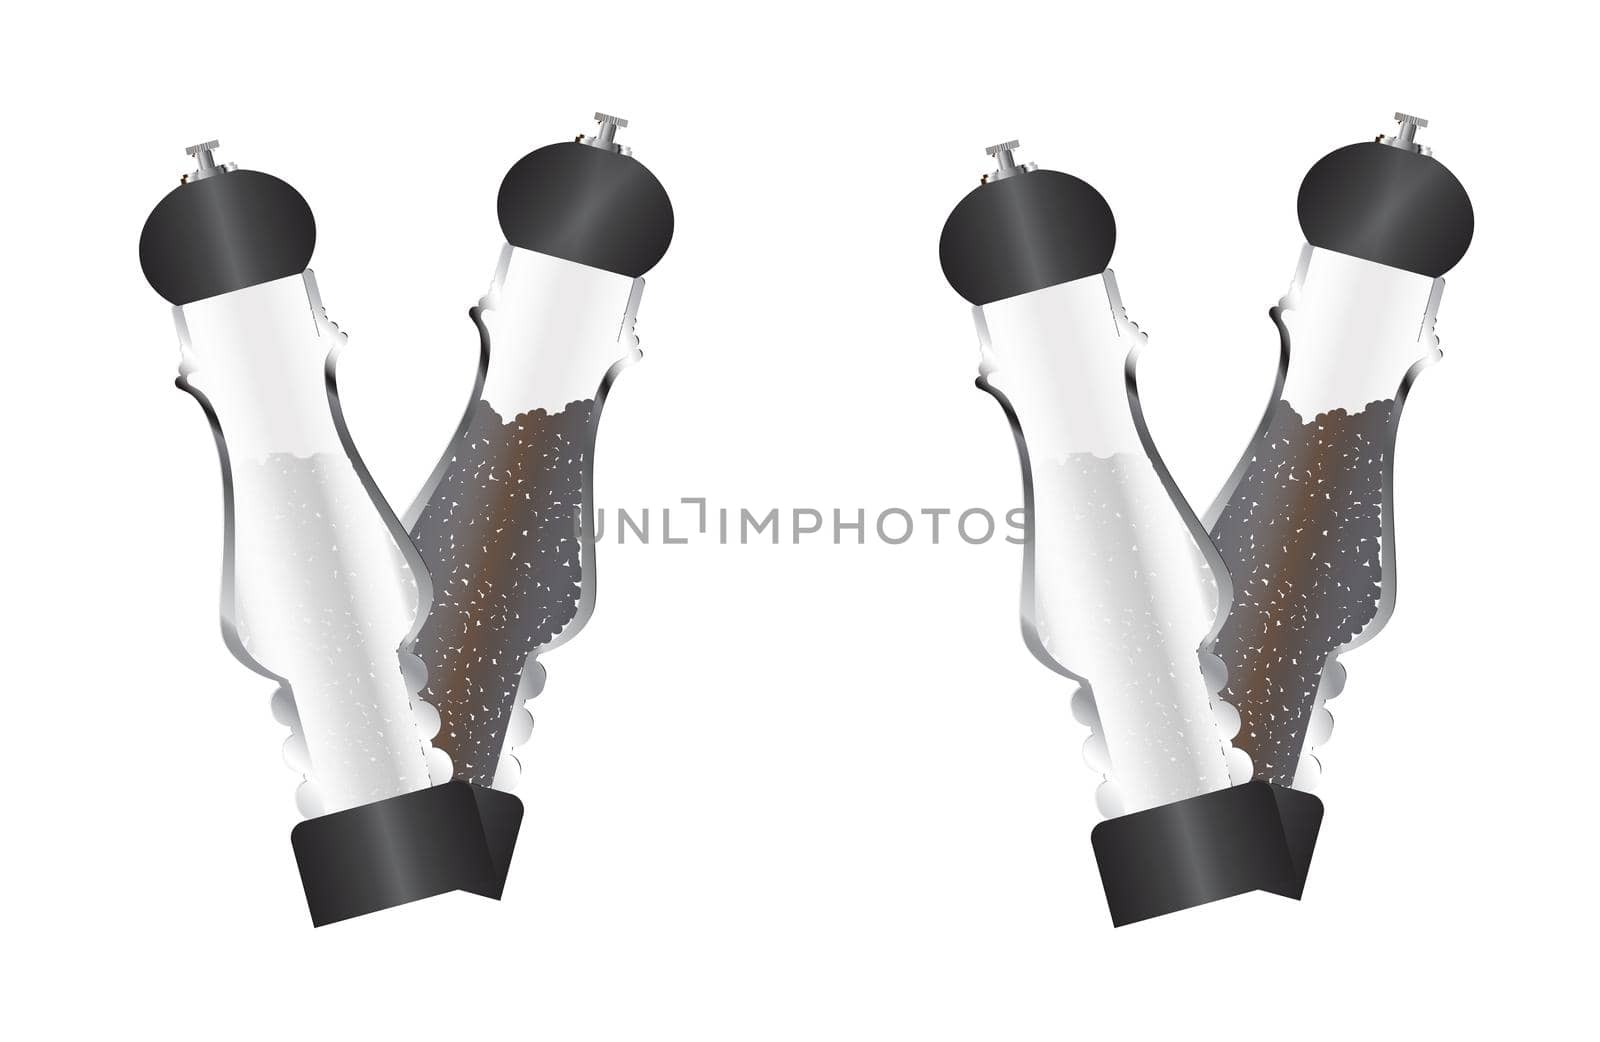 Glass salt and pepper grinder seamless banner over a white background